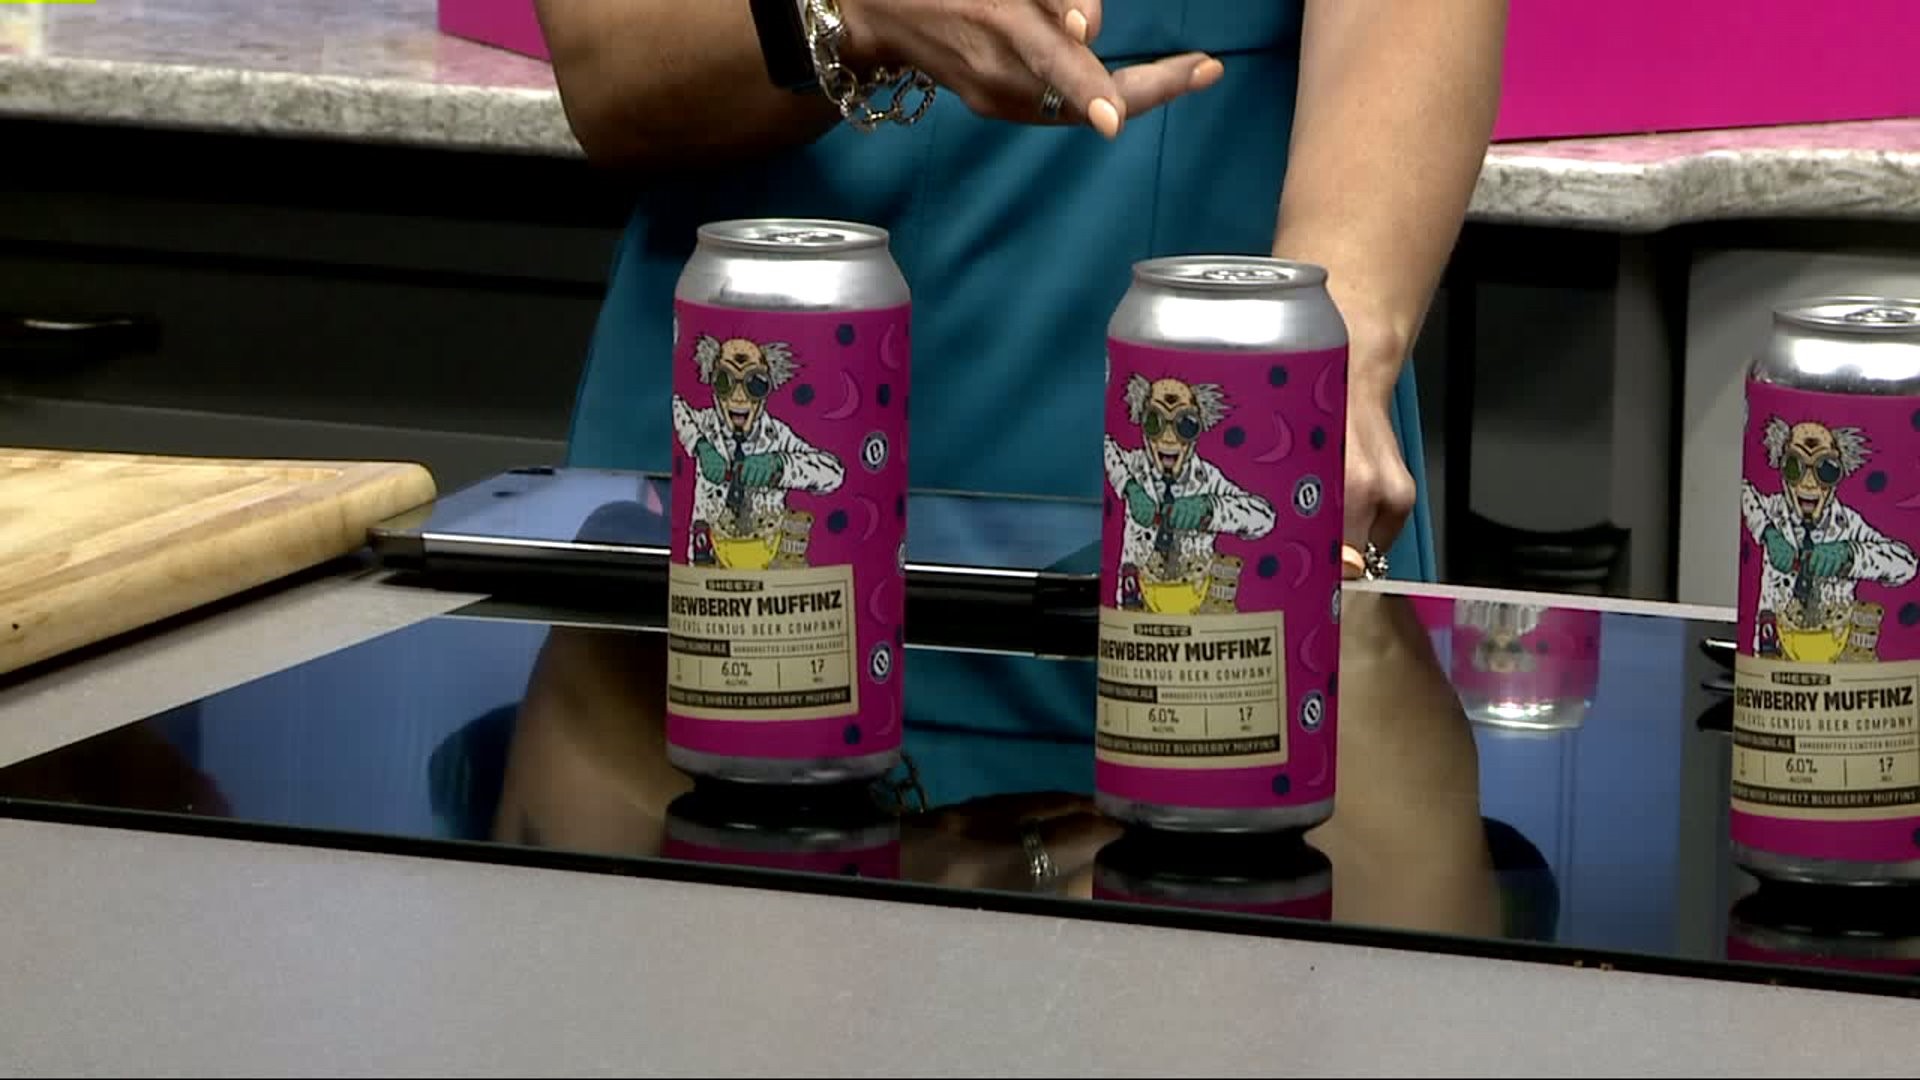 Sheetz to unveil new craft beer "Project Brewberry Muffinz"